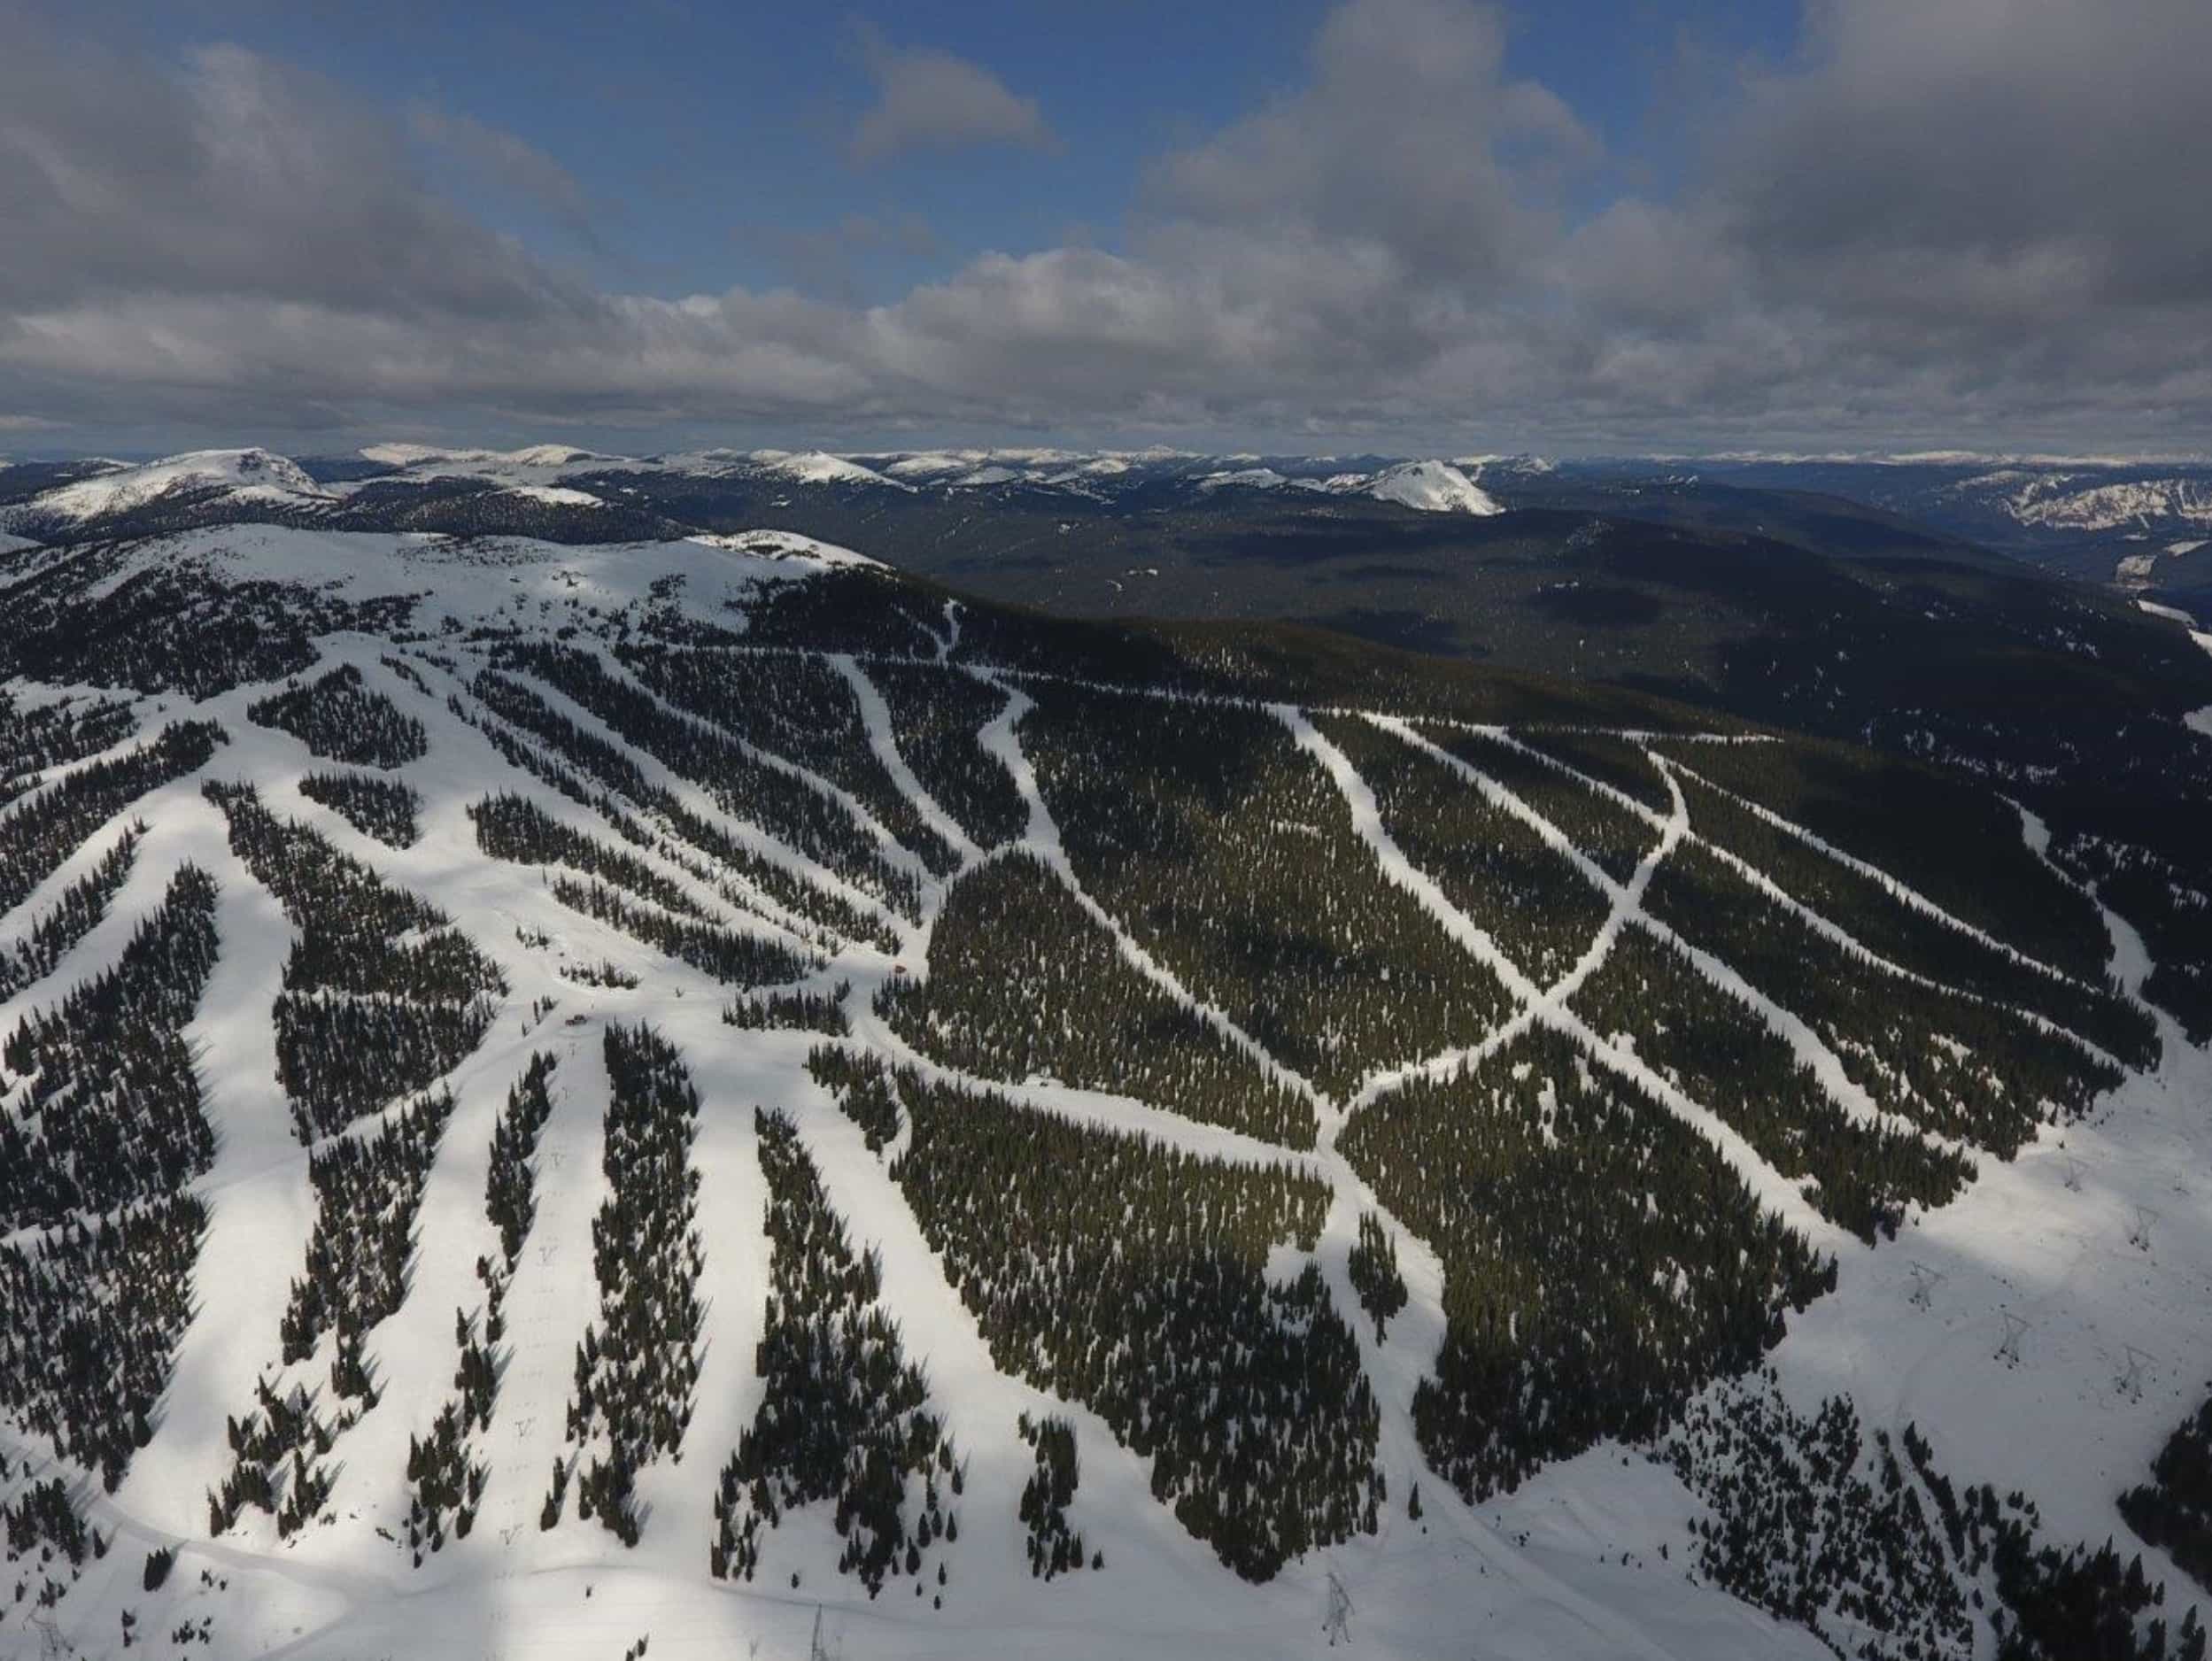 How much 3 days at a ski resort on B.C.'s Powder Highway will cost you